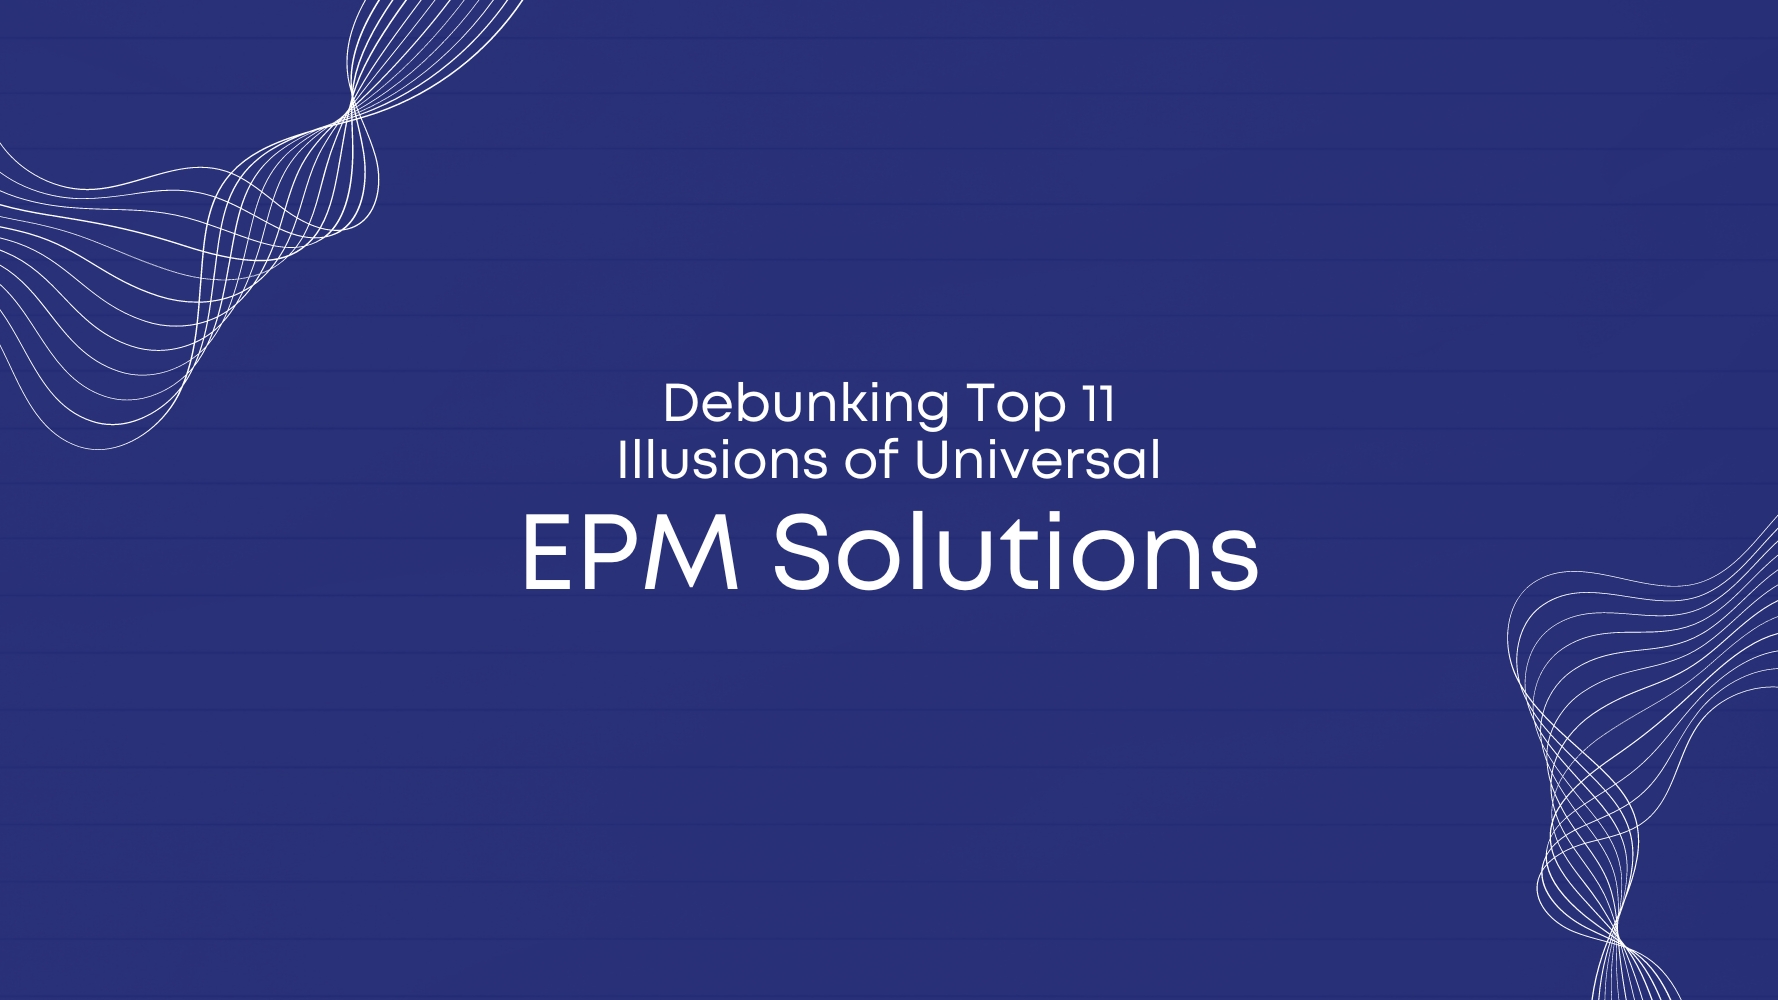 Debunking-Top-11-Illusions-of-Universal-EPM-Solutions.jpg